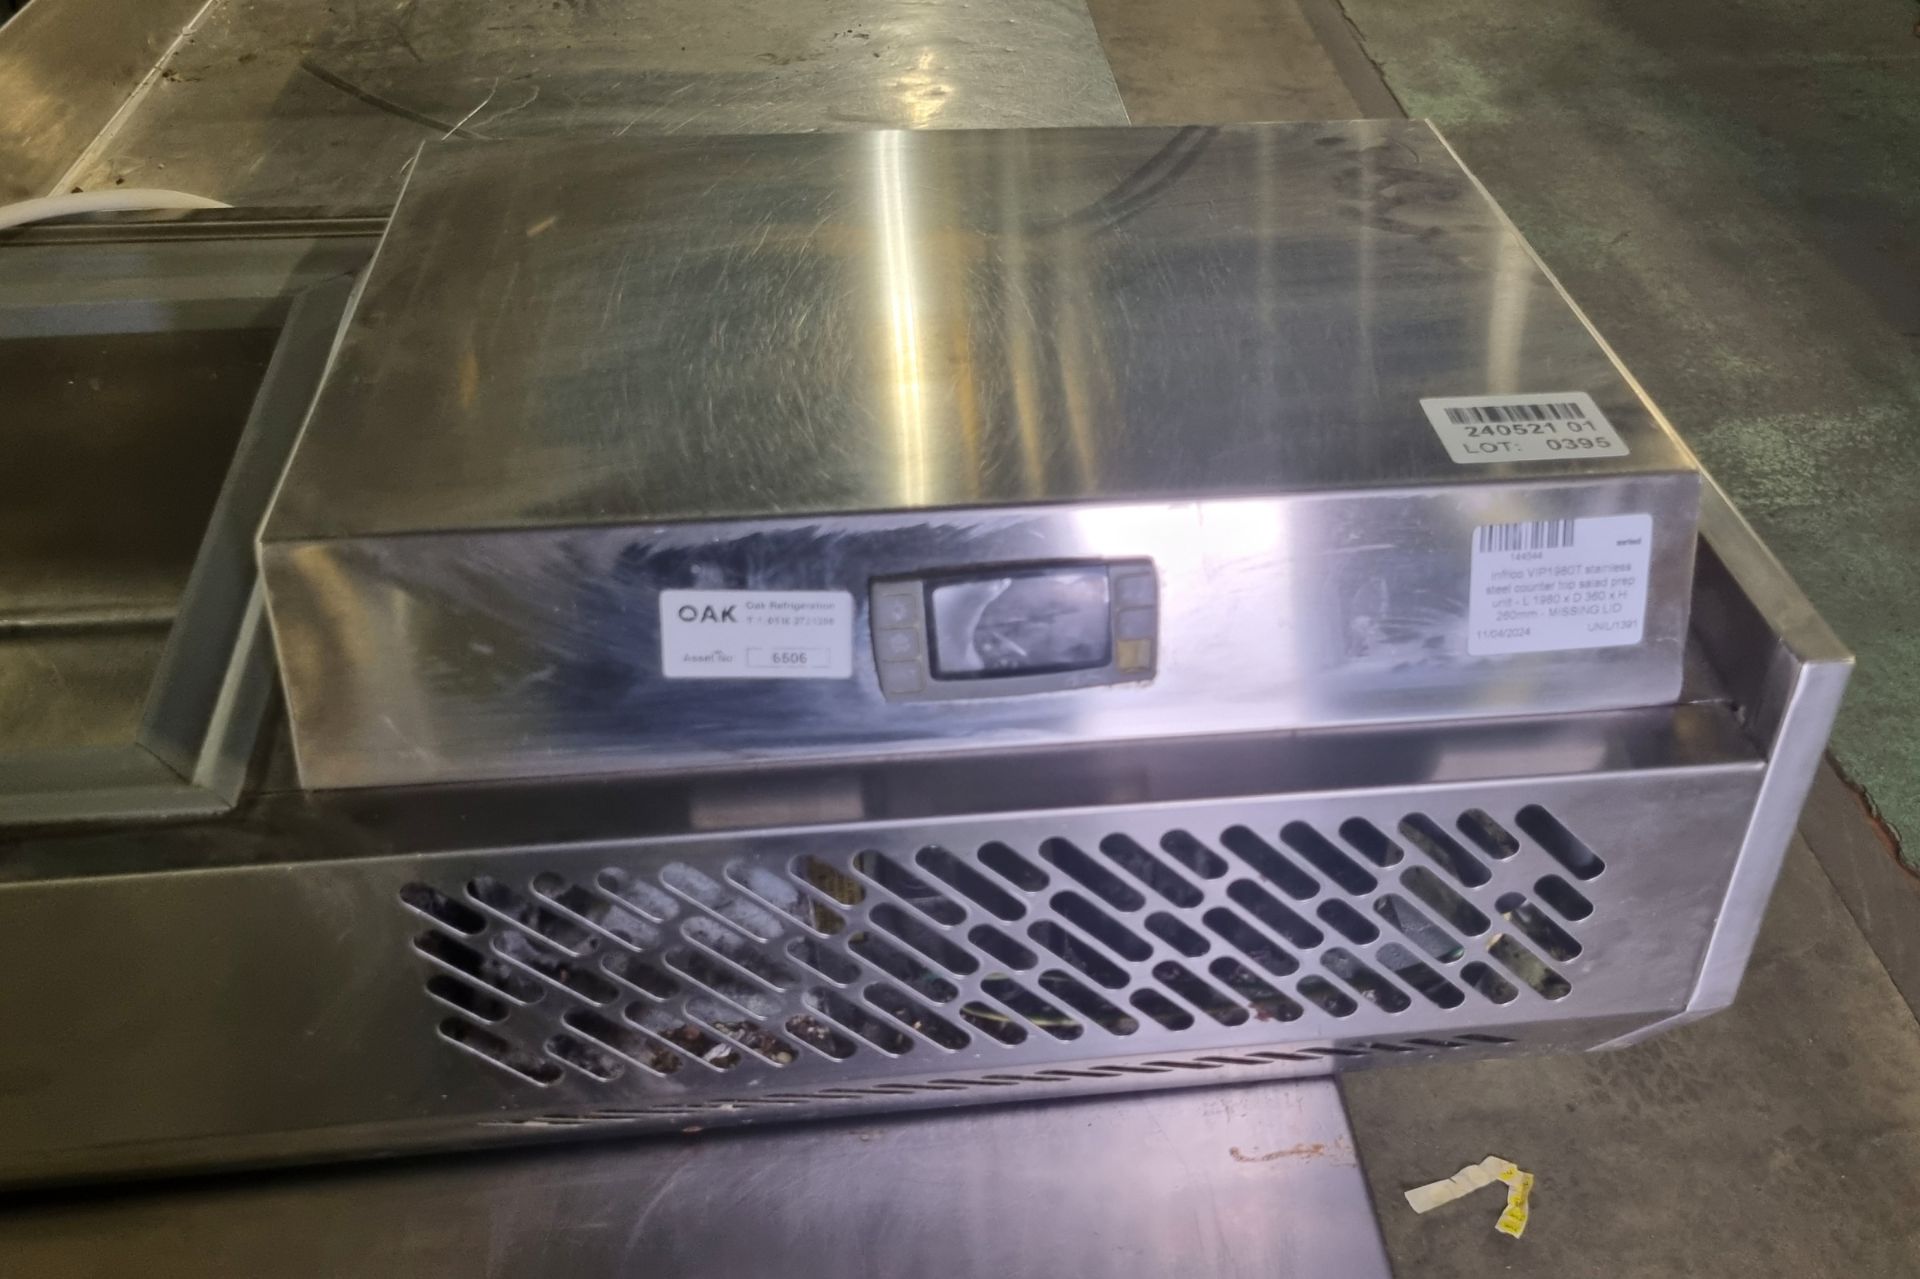 Infrico VIP1980T stainless steel countertop salad prep unit - L 1980 x D 360 x H 260mm - MISSING LID - Image 4 of 5